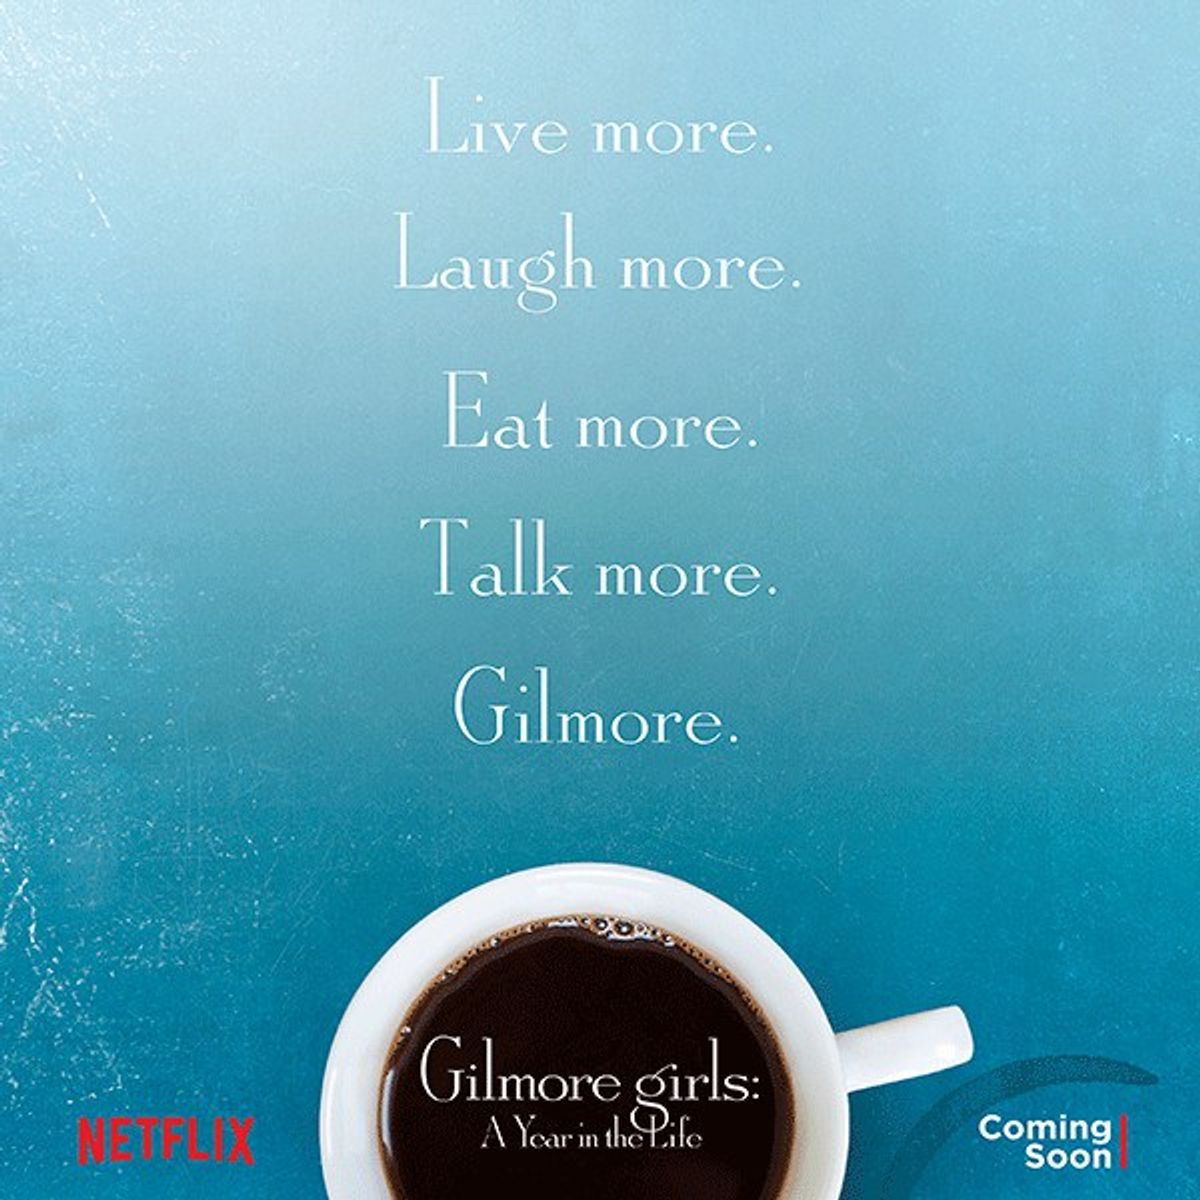 30 Things We Want In Gilmore Girls: A Year in the Life